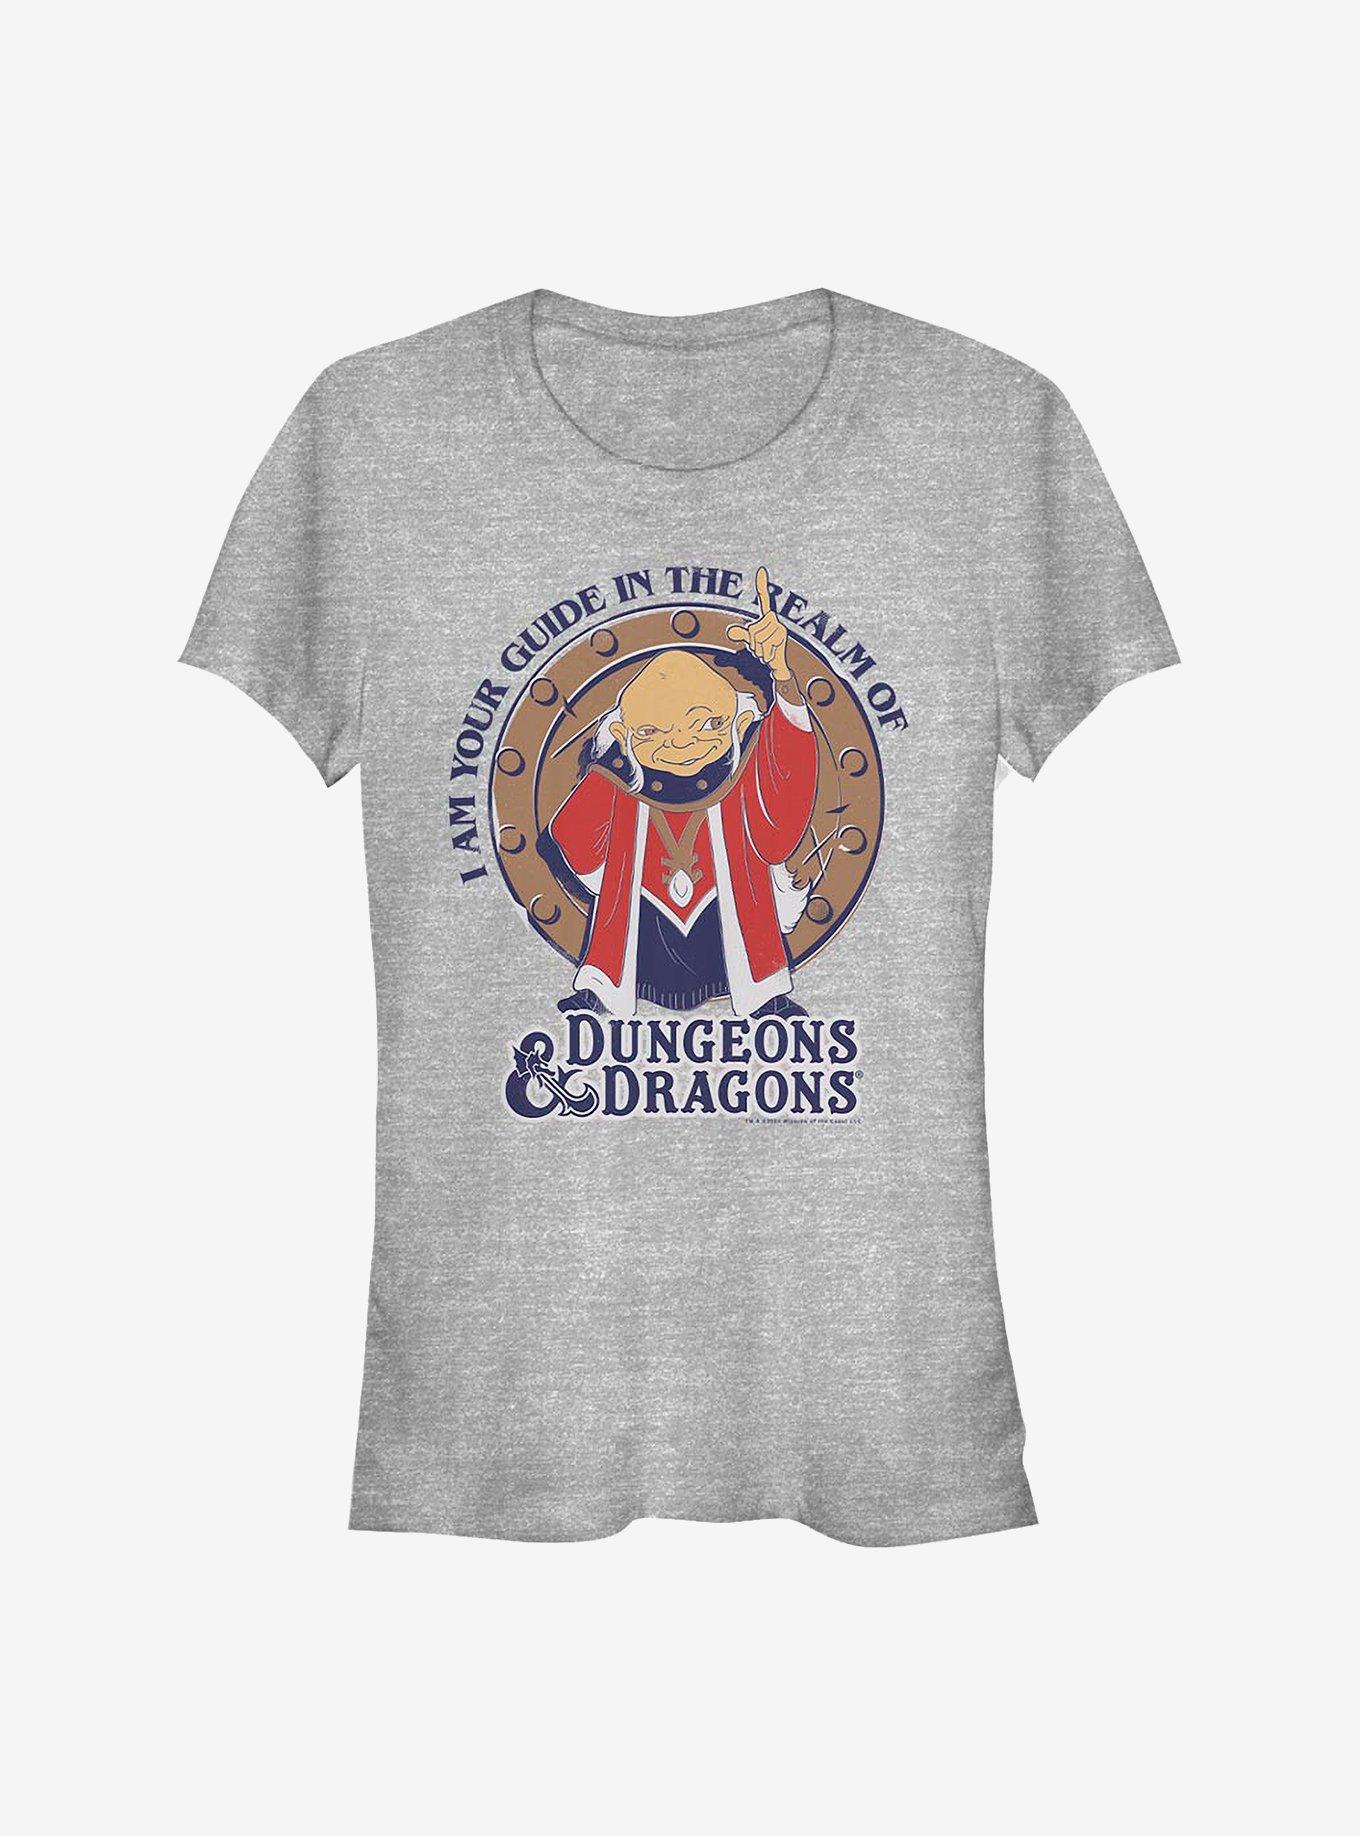 Dungeons & Dragons Old Wizard Girls T-Shirt, ATH HTR, hi-res